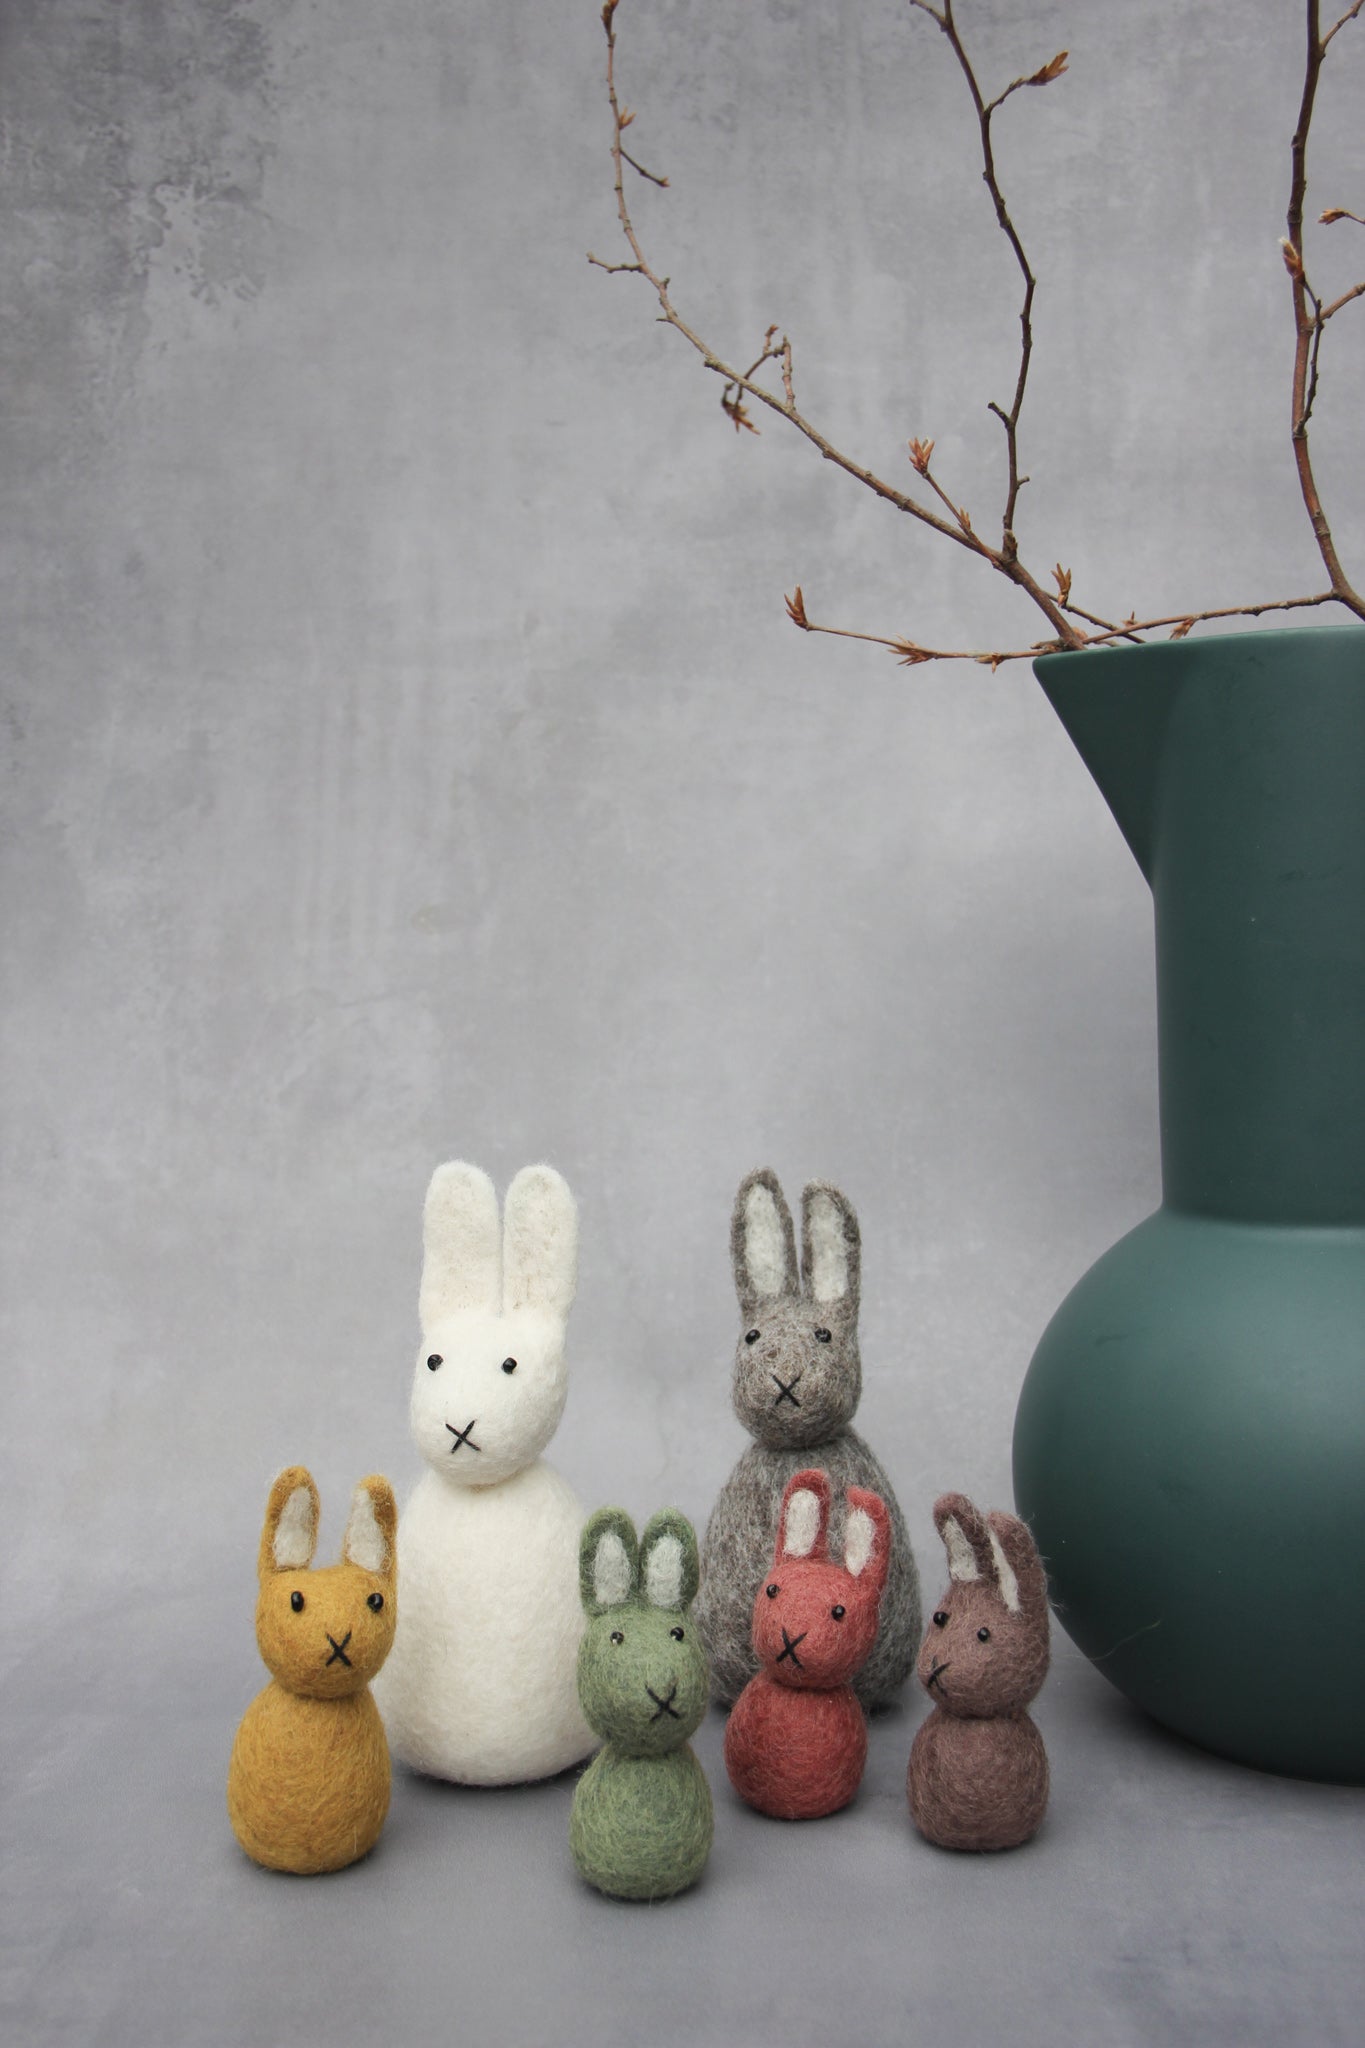 en gry & sif ochre, green, brown and red bunnies standing in a group next to a vase